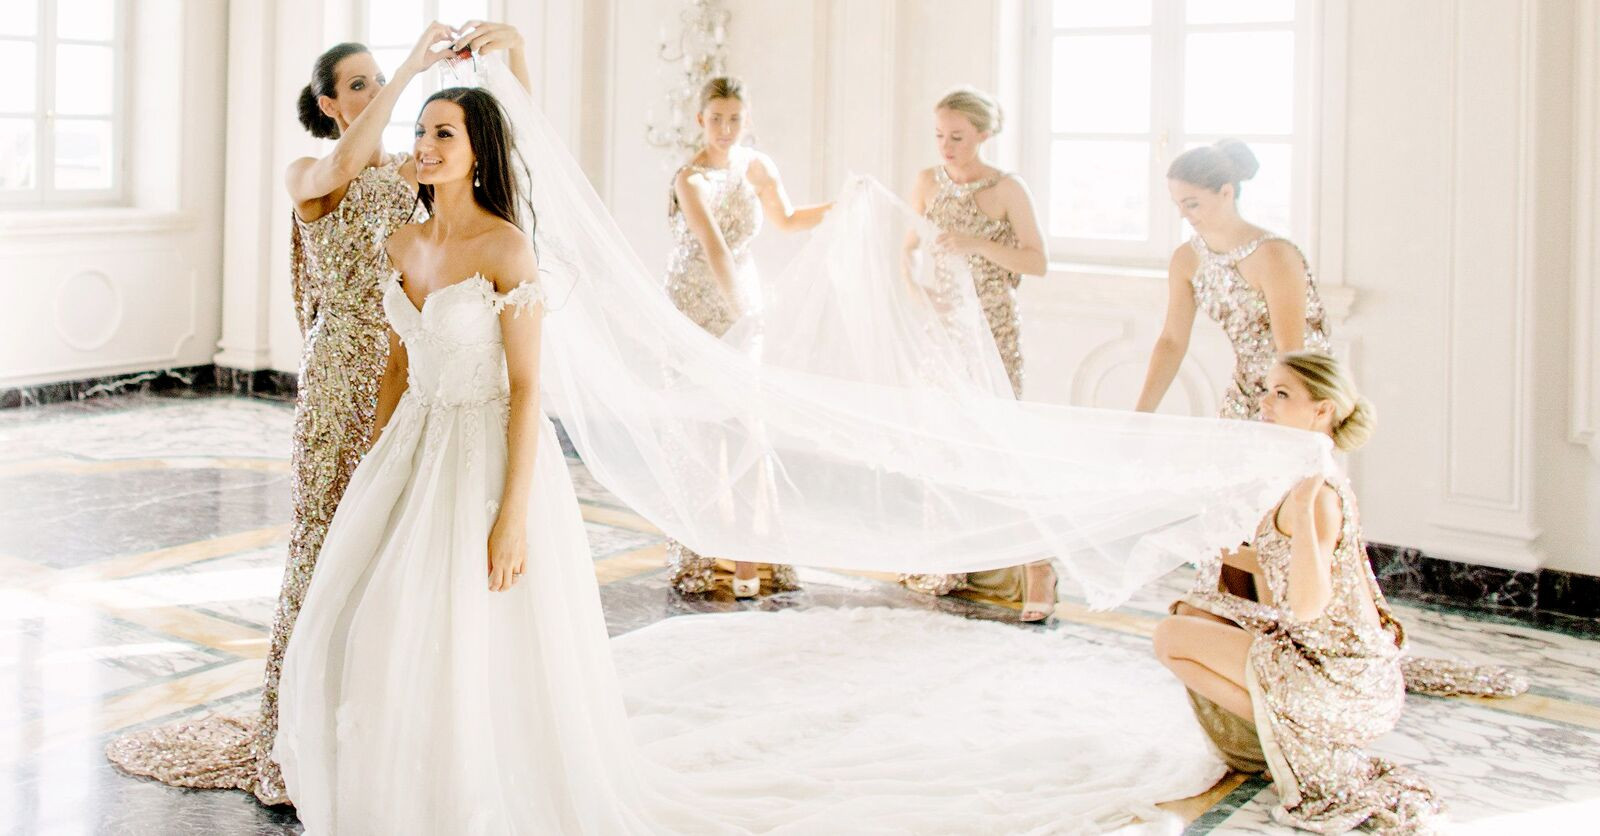 Average Wedding Dress Cost
 This Was the Average Cost of a Wedding Dress in 2018